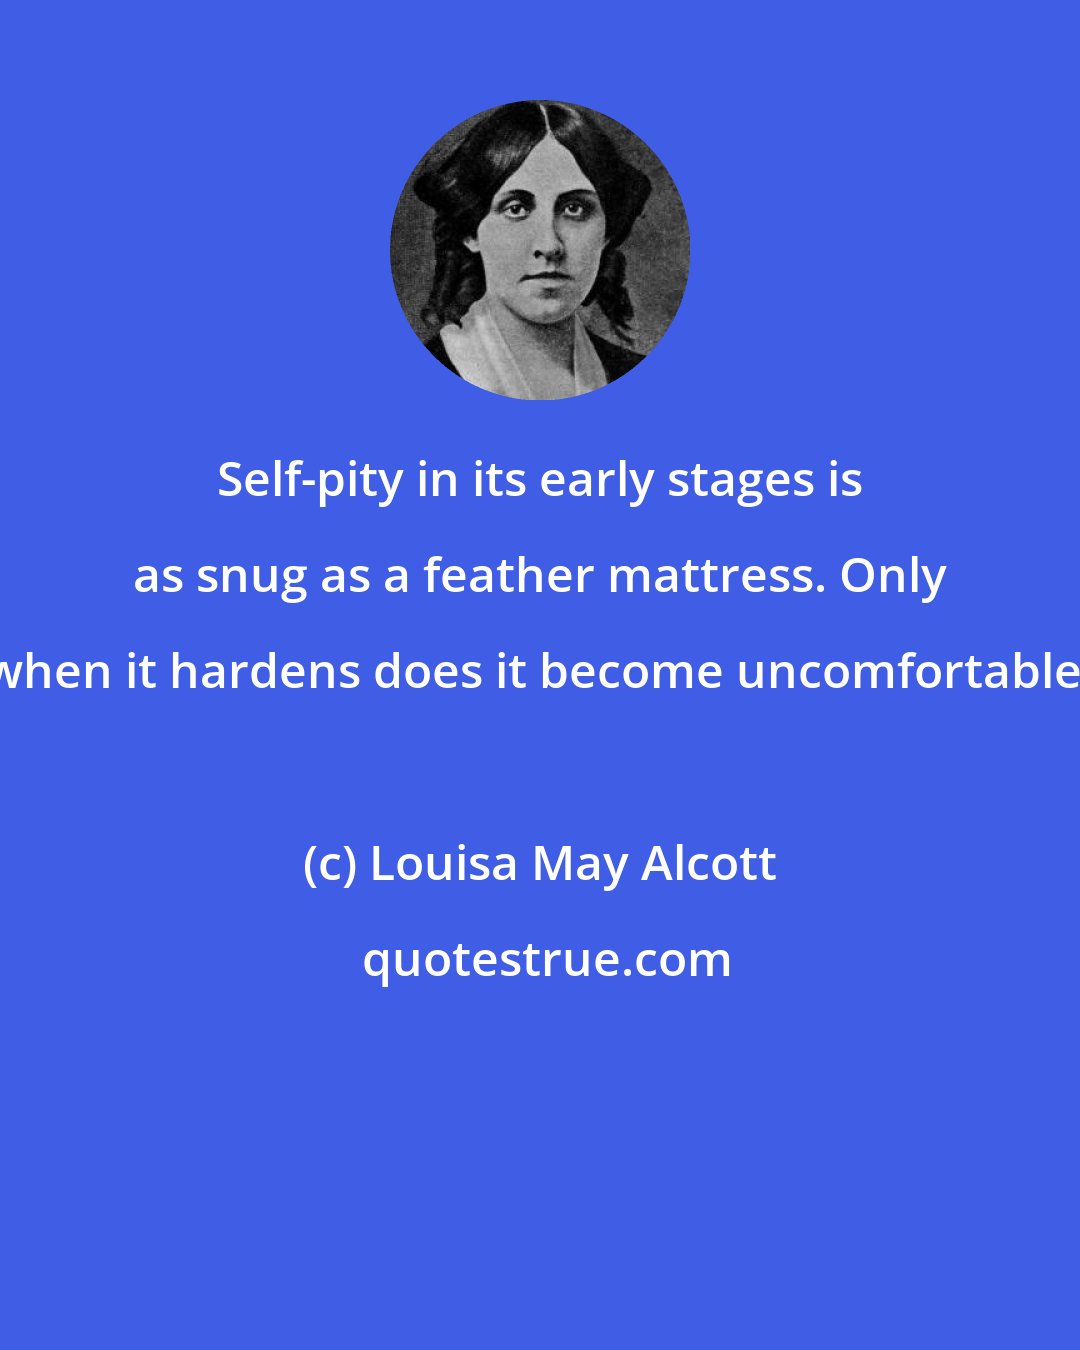 Louisa May Alcott: Self-pity in its early stages is as snug as a feather mattress. Only when it hardens does it become uncomfortable.